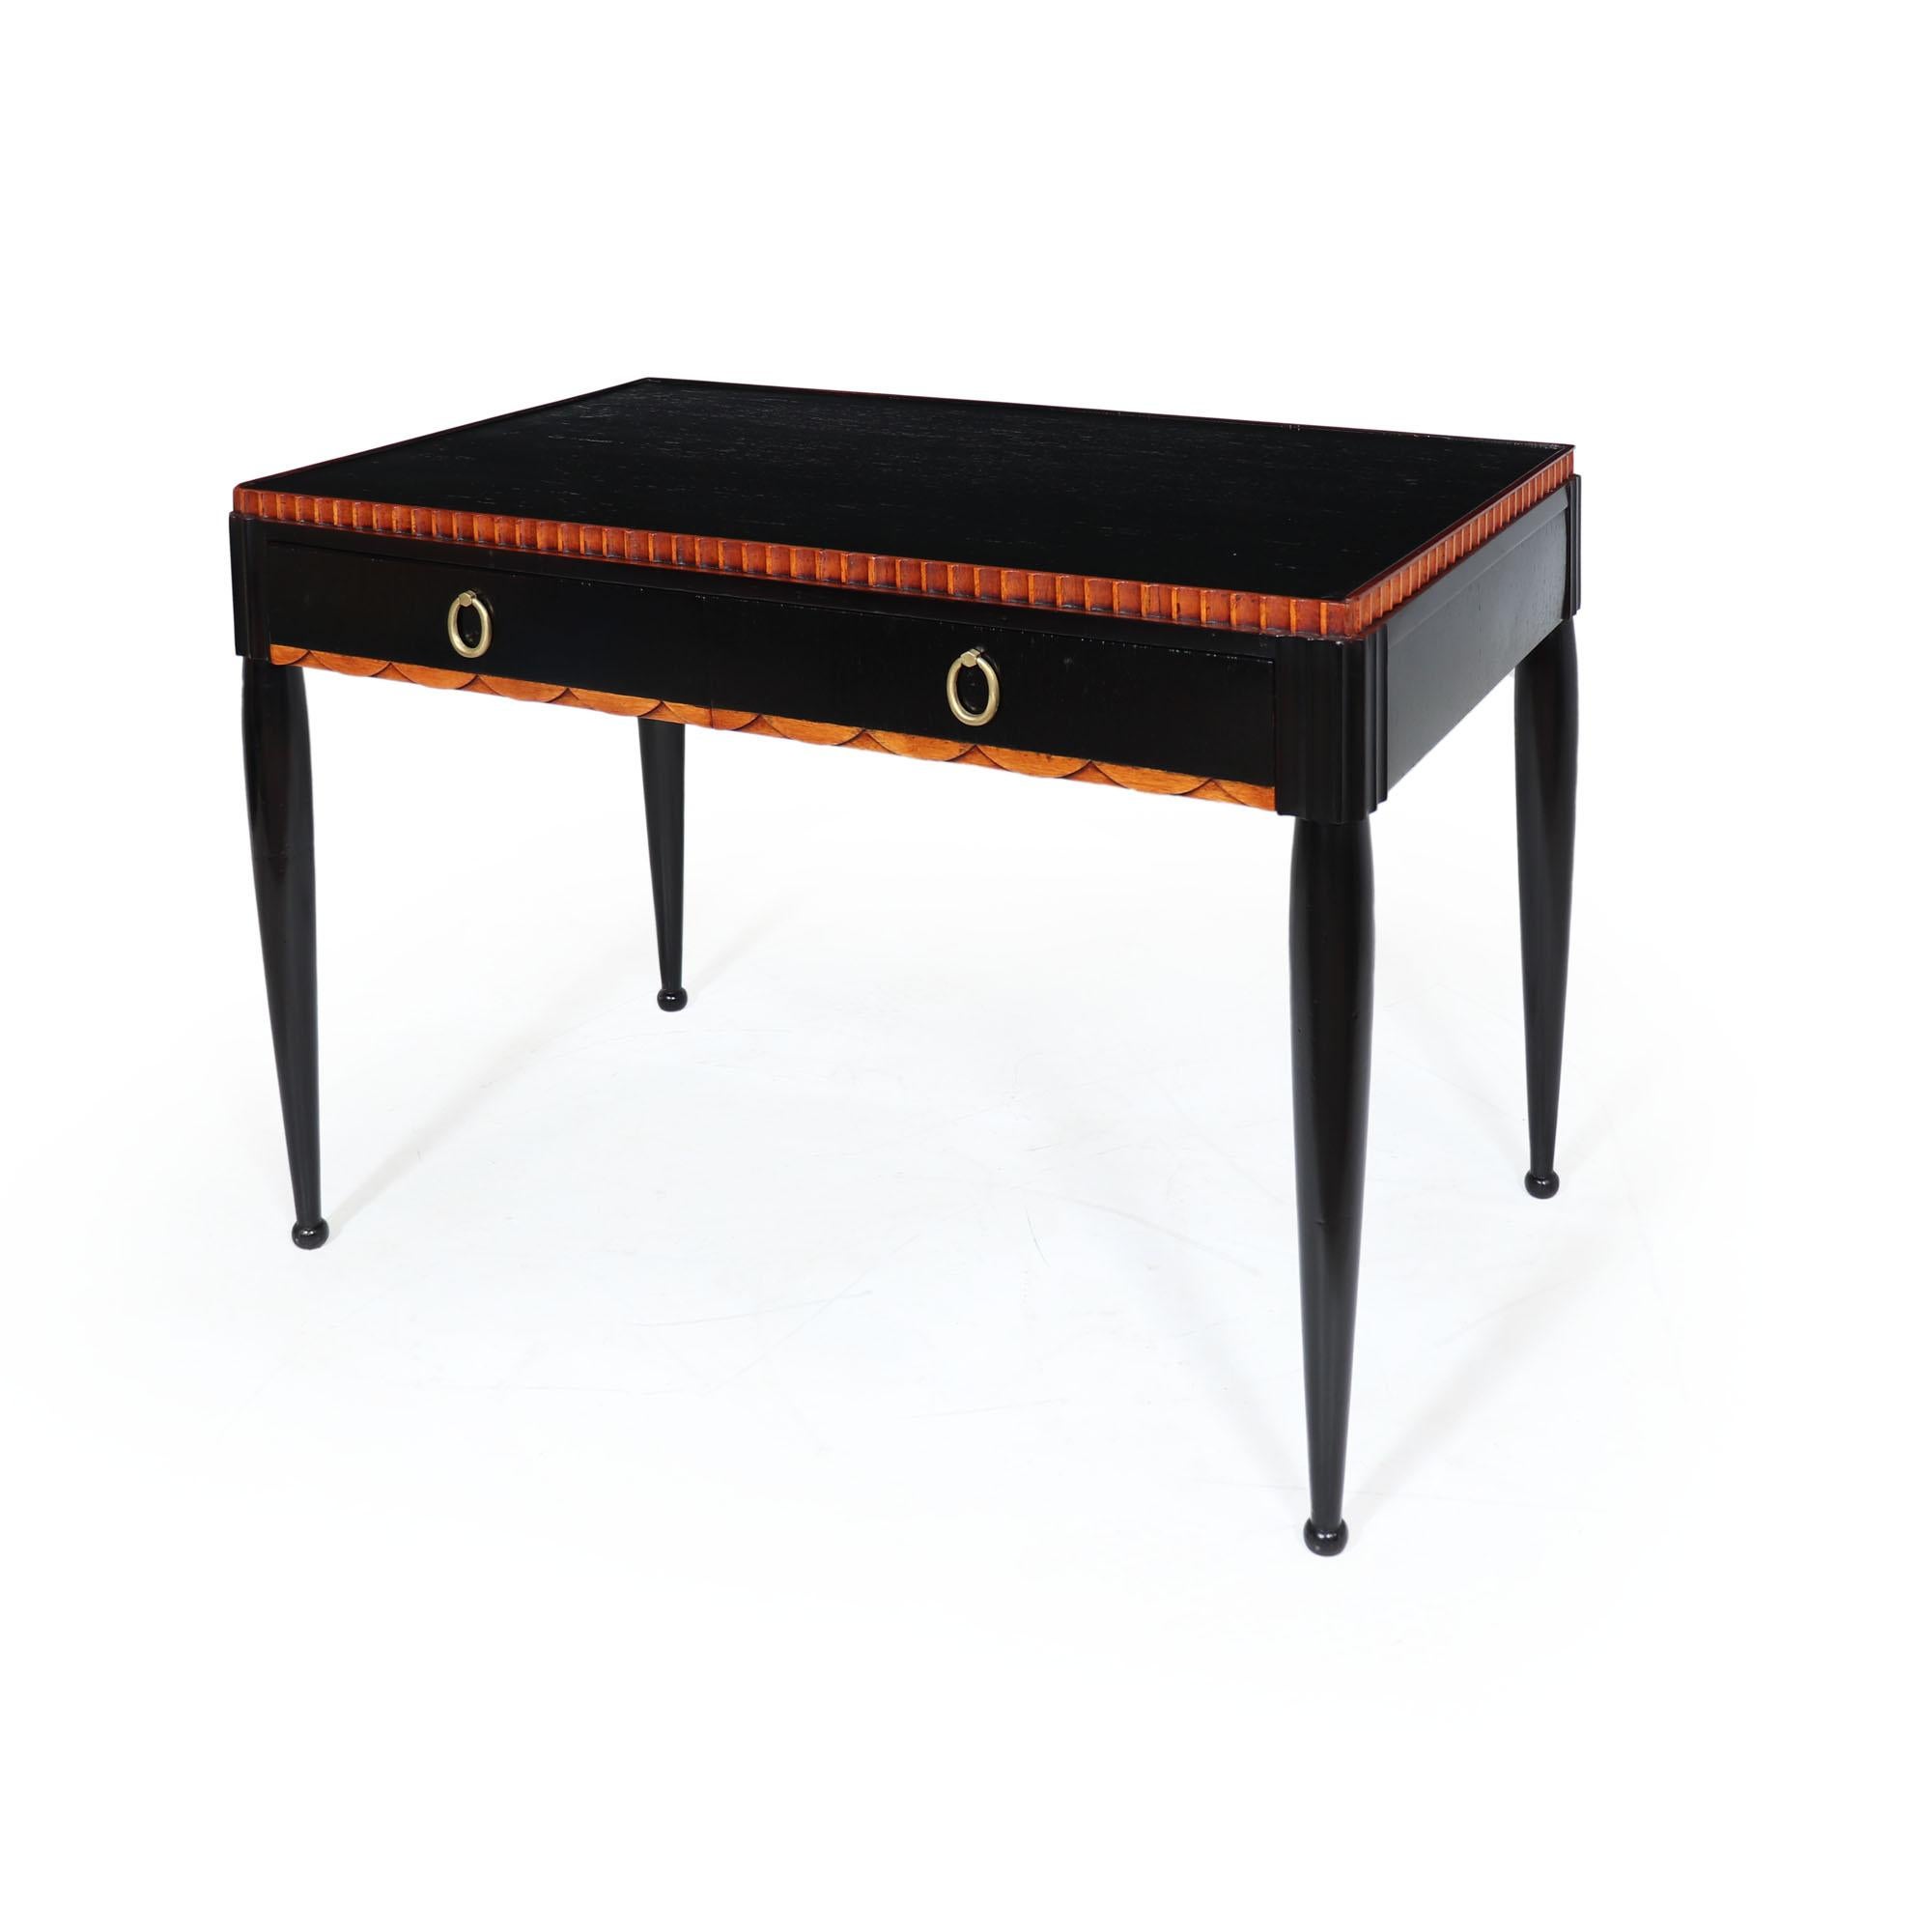 Art Deco writing table produced in France in the 1930’s from Mahogany, having an ebonised body with fluted detail, the desk has two drawers and brass ring handles this stands on turned legs
Age: 1930

Style: Art Deco

Origin :